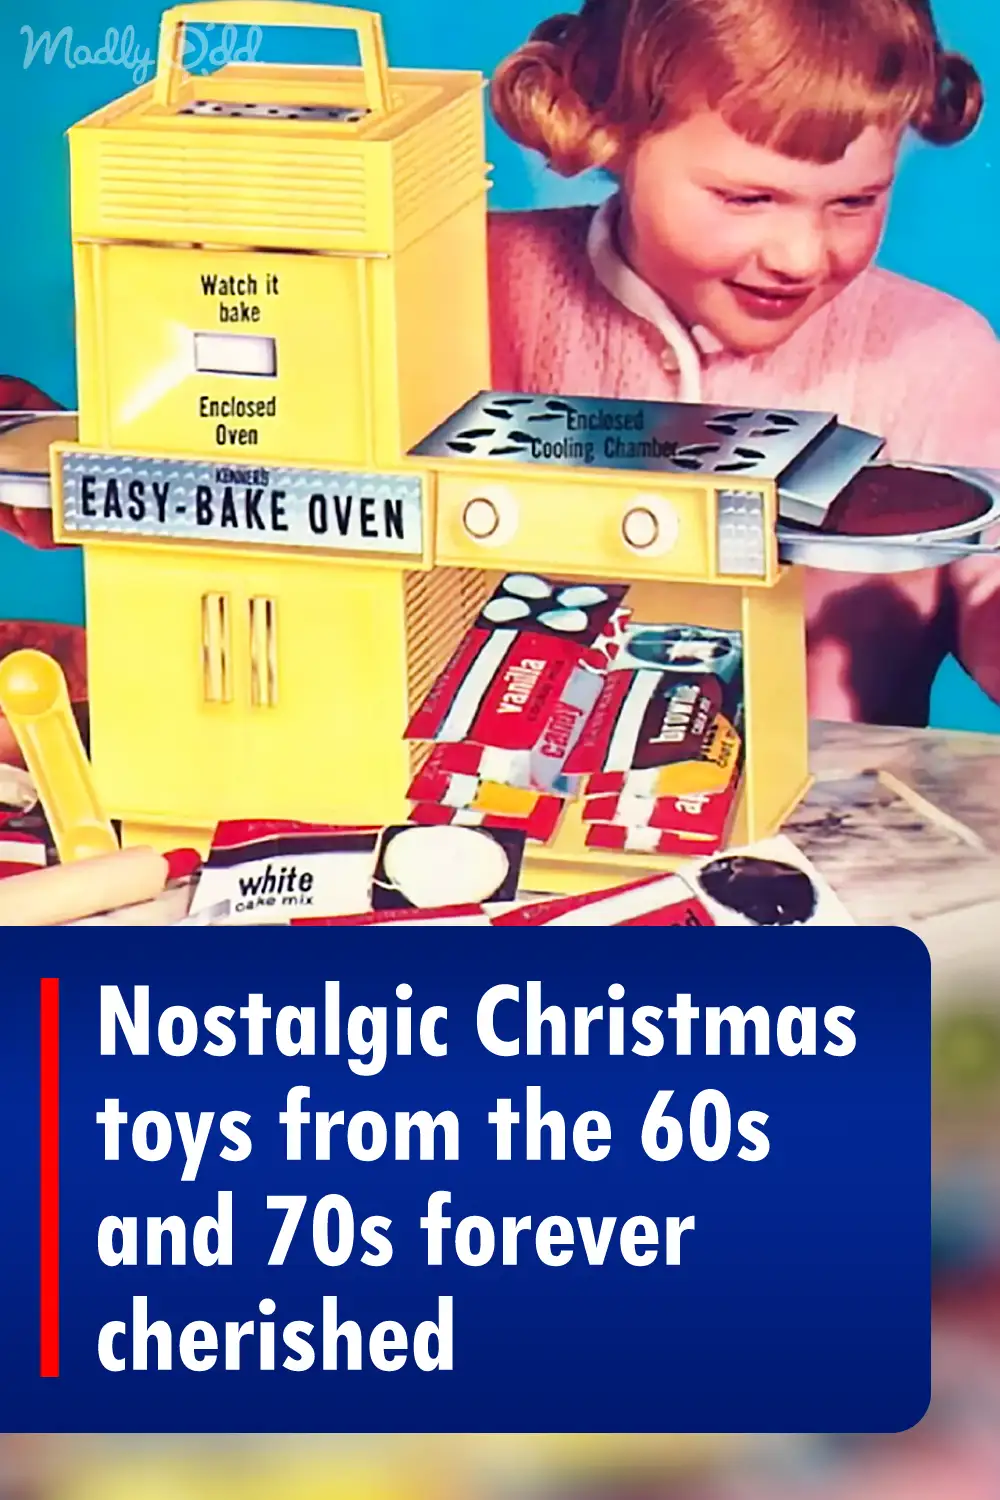 Nostalgic Christmas toys from the 60s and 70s forever cherished